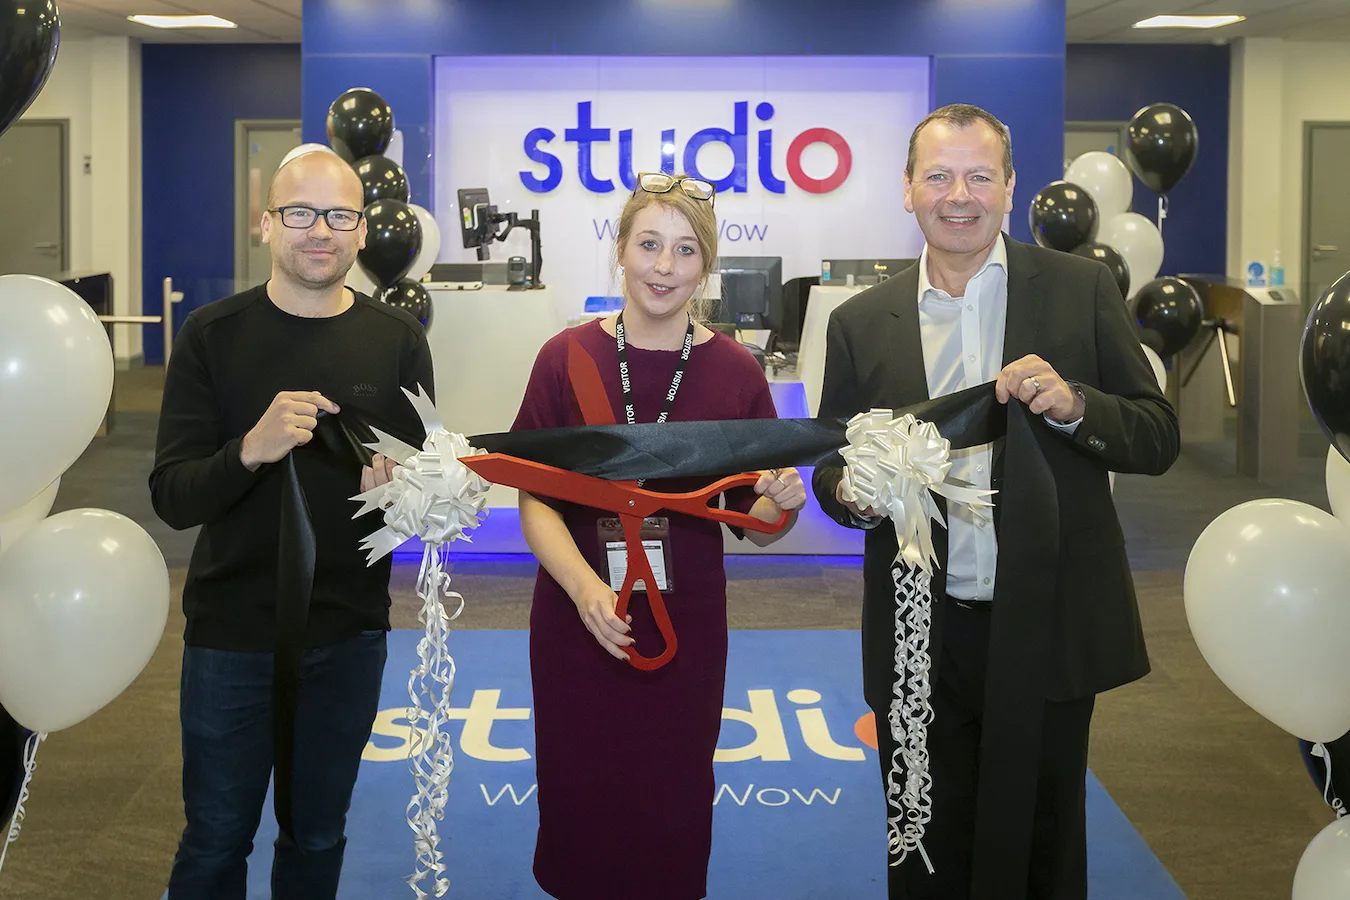 Frasers Group further invests in Hyndburn with the purchase of Studio Retail office